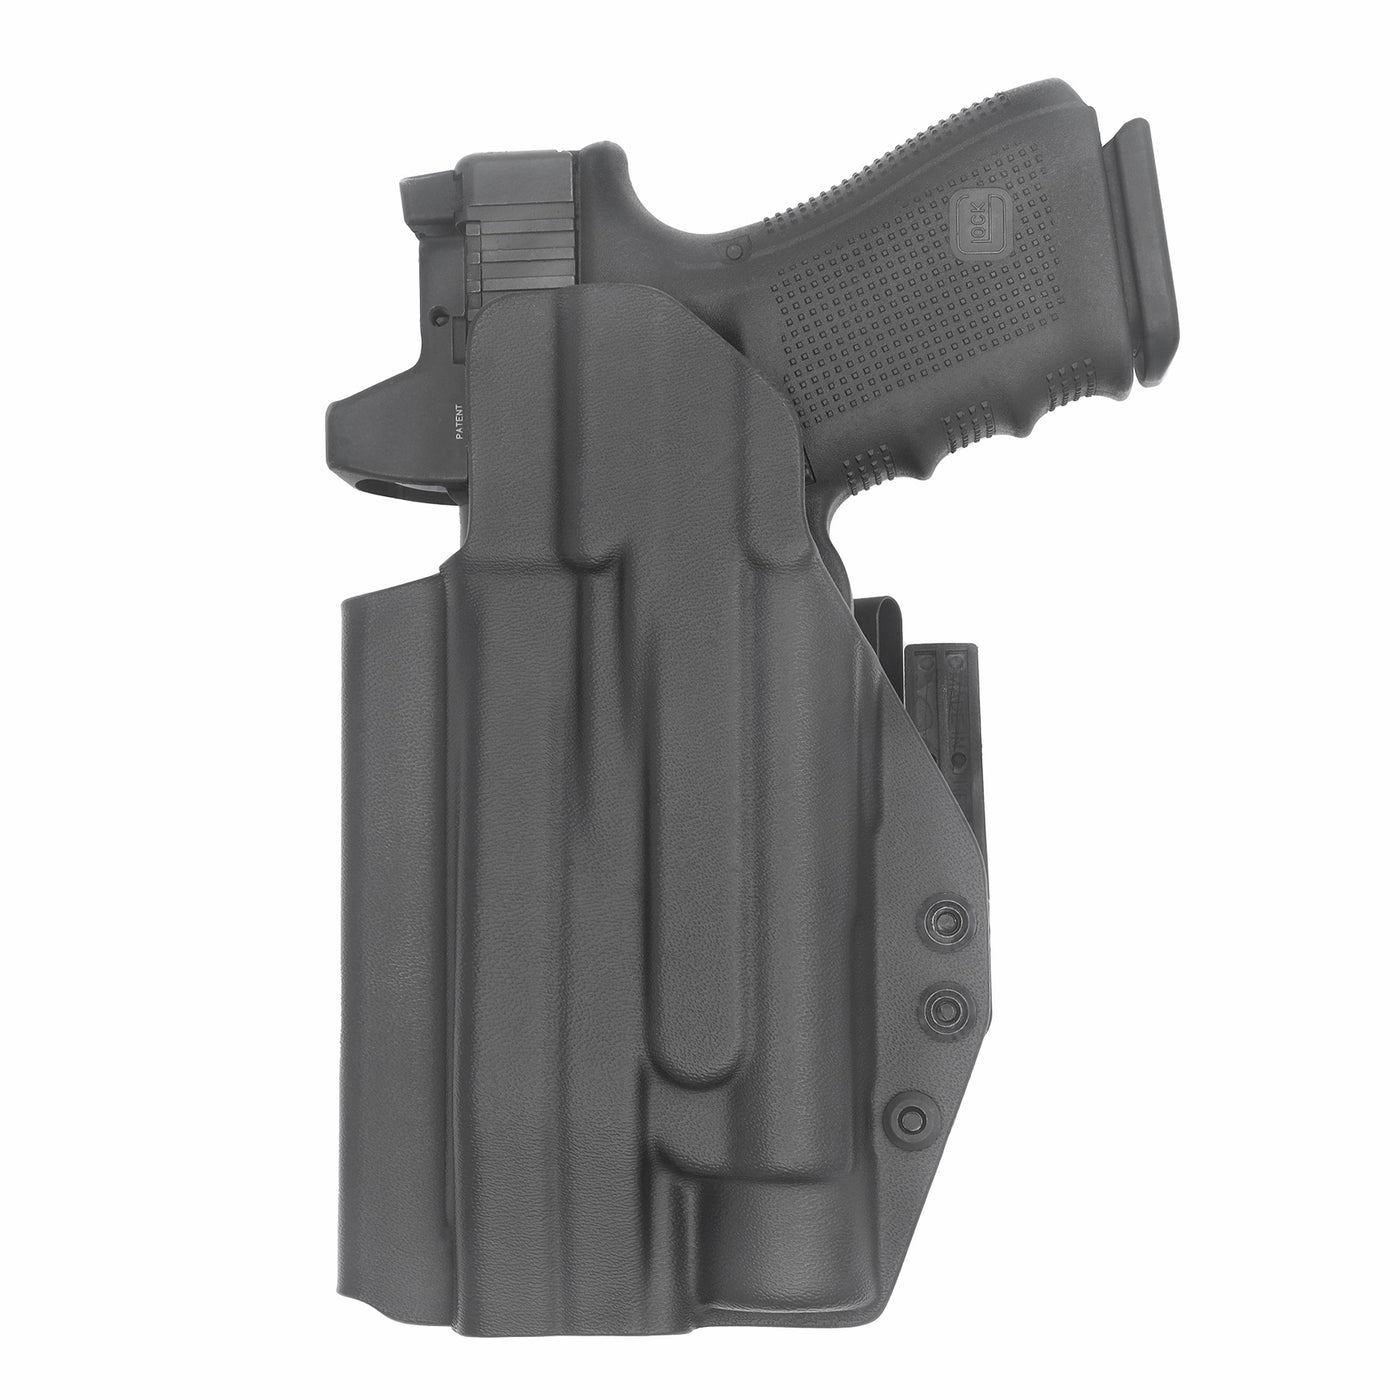 C&G Holsters quickship IWB ALPHA UPGRADE Tactical Shadow Systems Streamlight TLR1 holstered back view